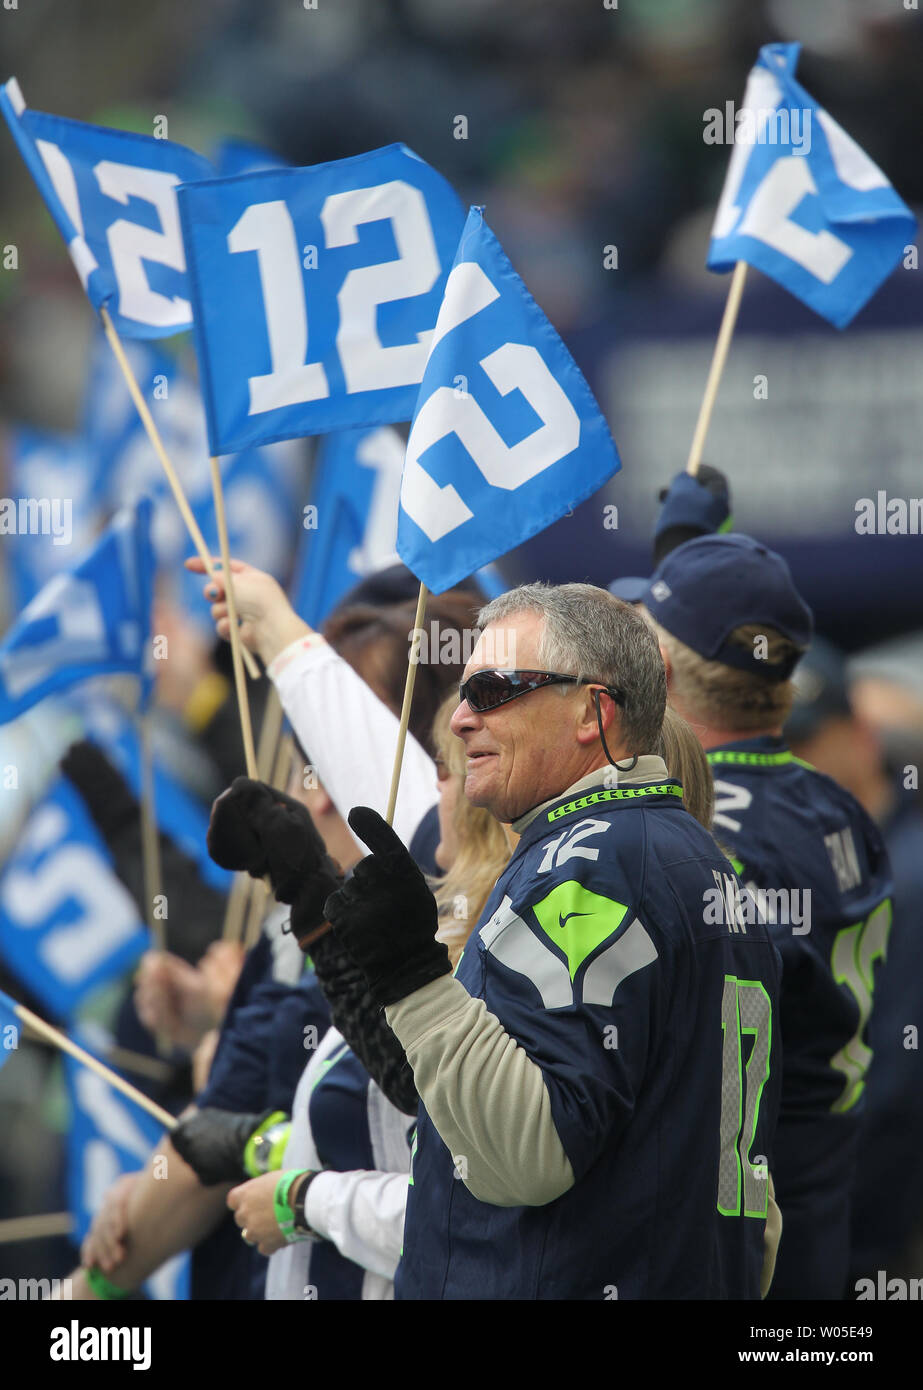 DVIDS - Images - Navy Region Northwest Passes Seahawks' 12th-Man Flag to  1st Special Forces Group [Image 3 of 5]